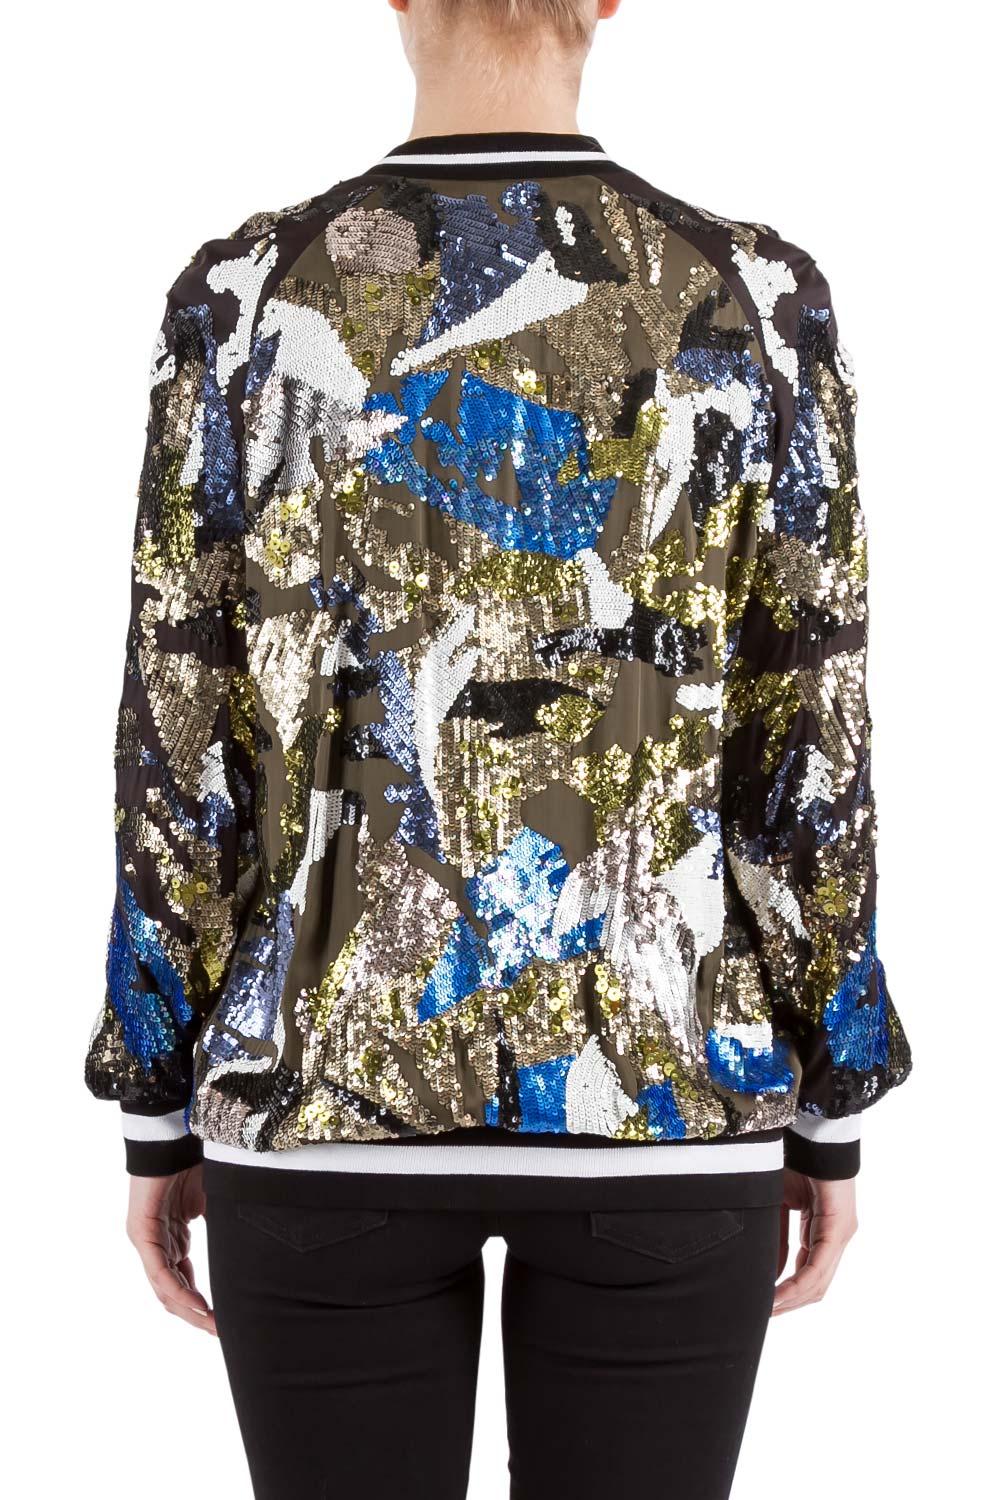 This bomber jacket is from the house of Amen. Crafted into a sequin-embellished design, this bomber jacket can be layered over your party outfits to set a stylish fashion statement that makes you the centre of attention wherever you go.

Includes: